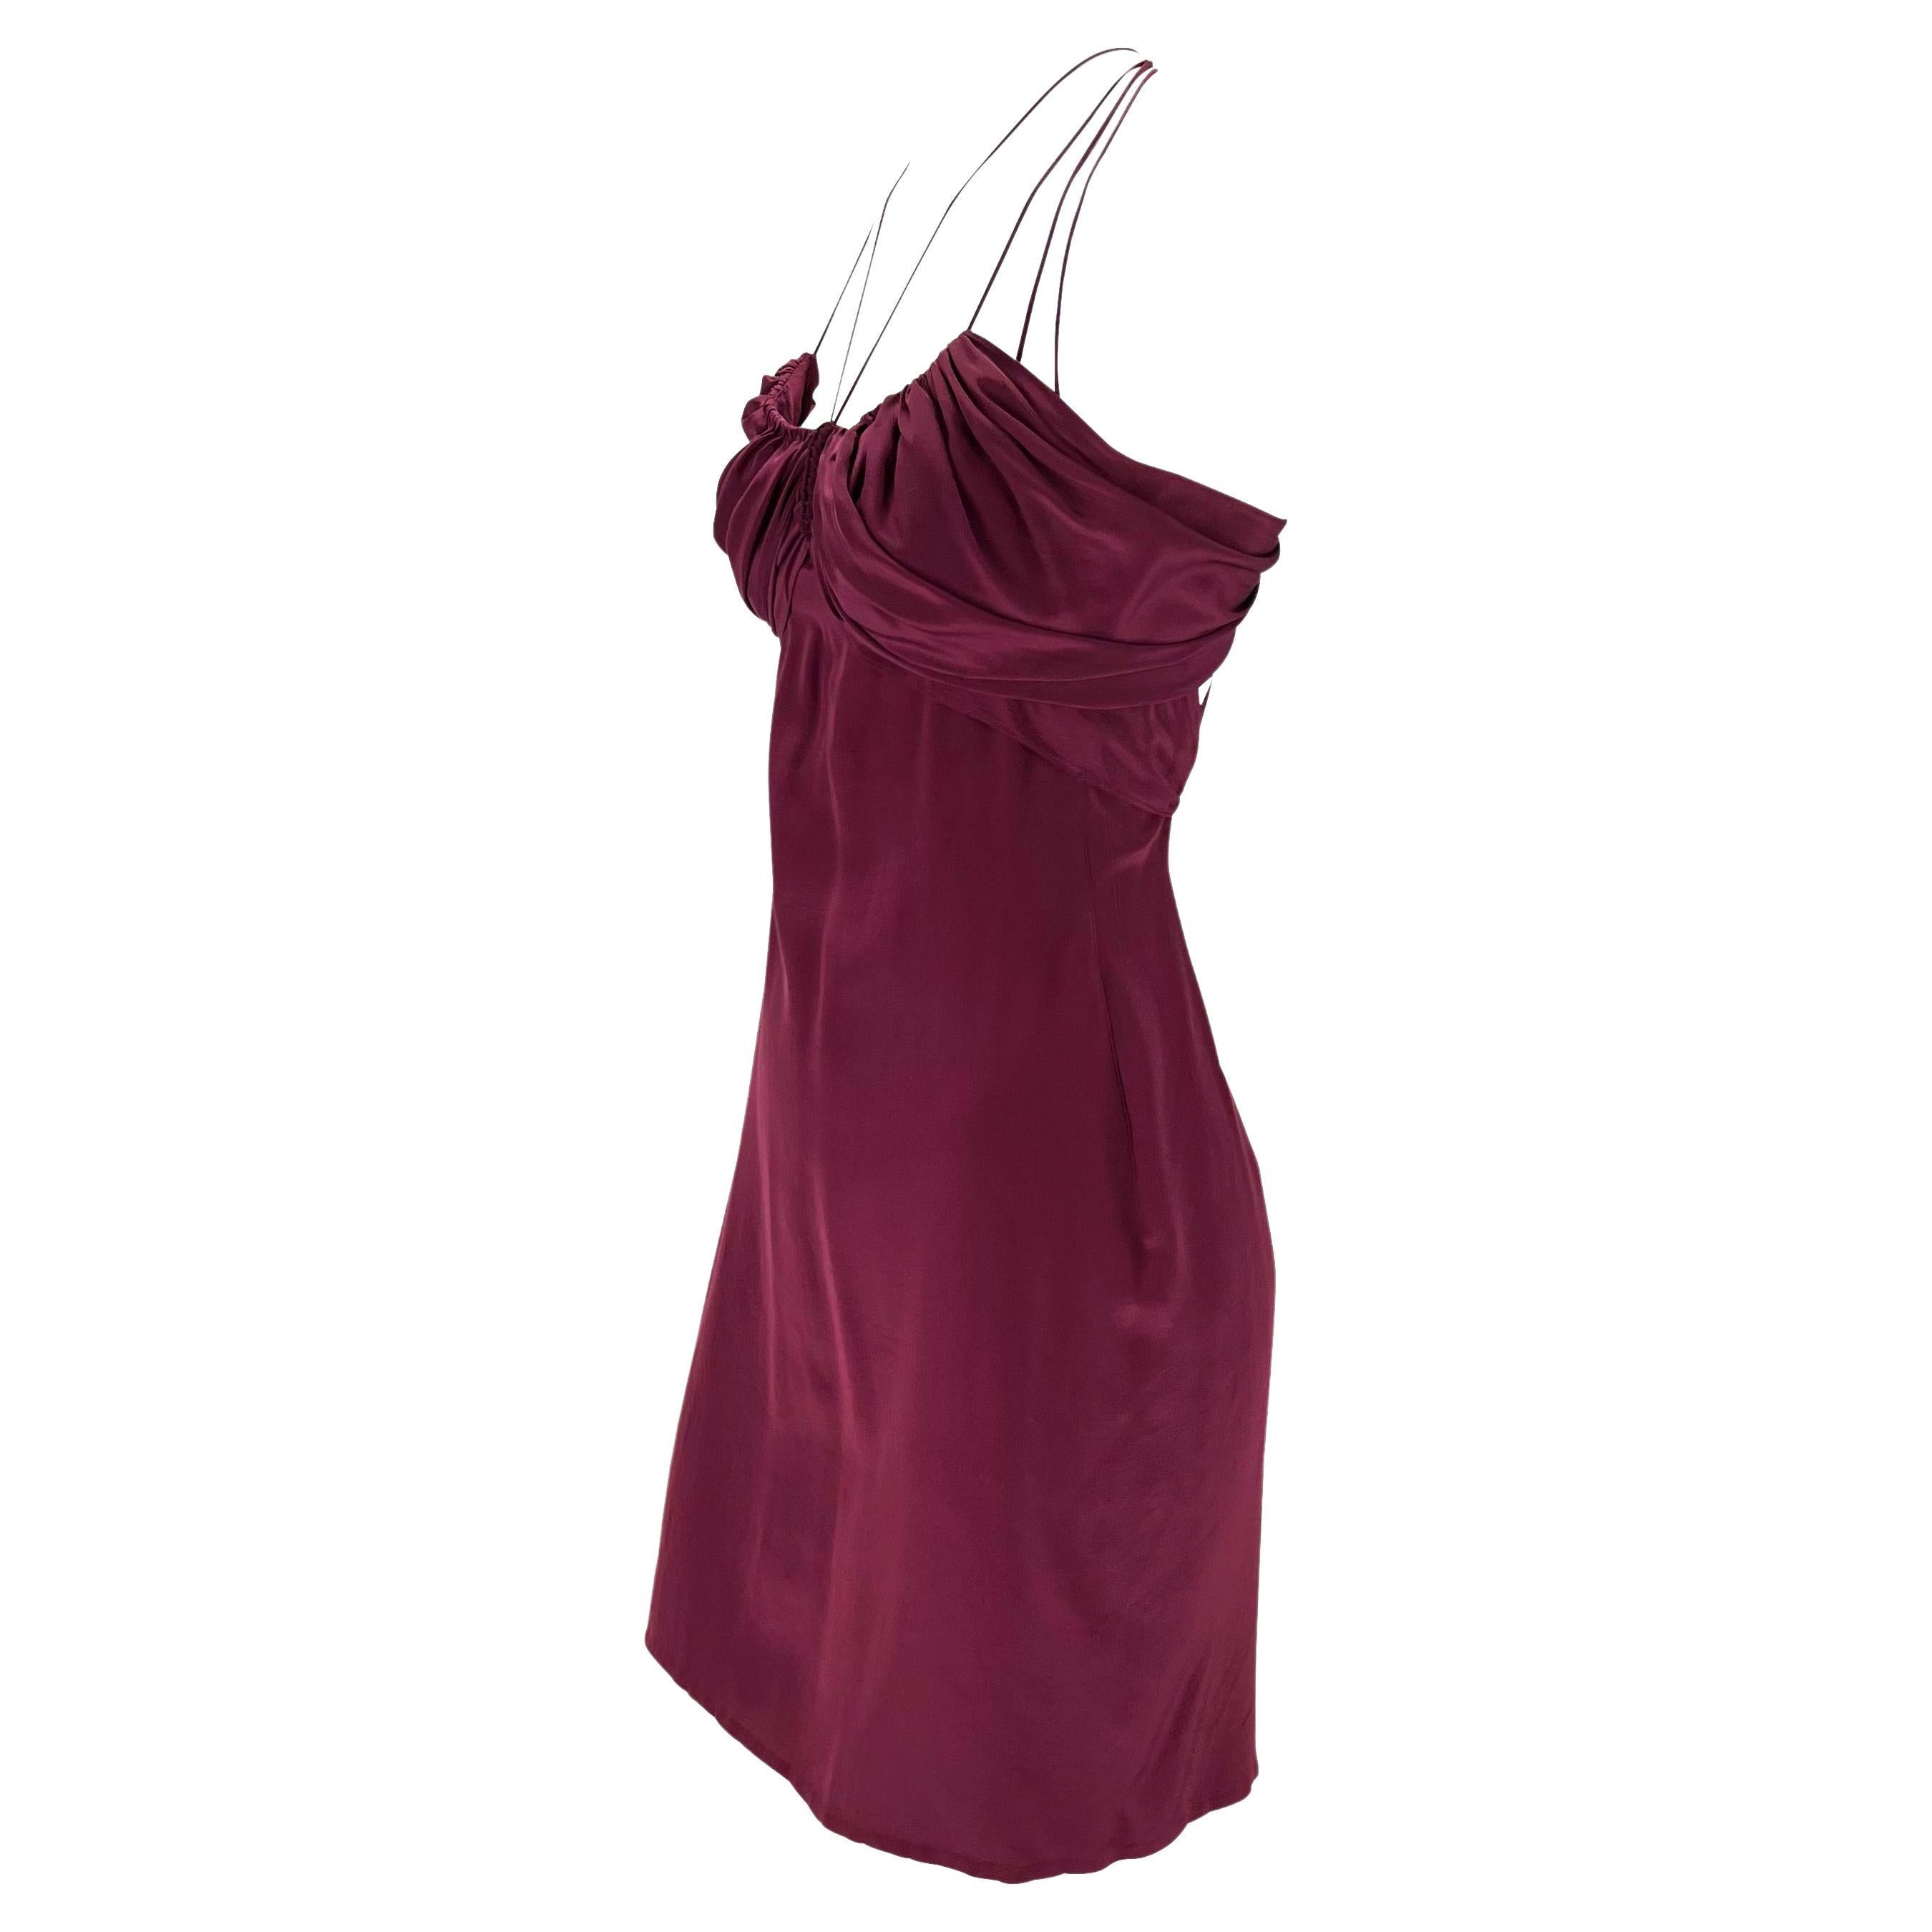 Presenting a beautiful plum Gucci mini dress, designed by Tom Ford. From Fall/Winter 2002, this stunning dress features ruched fabric at the bust with several thin straps which meet at the neck and are braided at the back. The dress features a